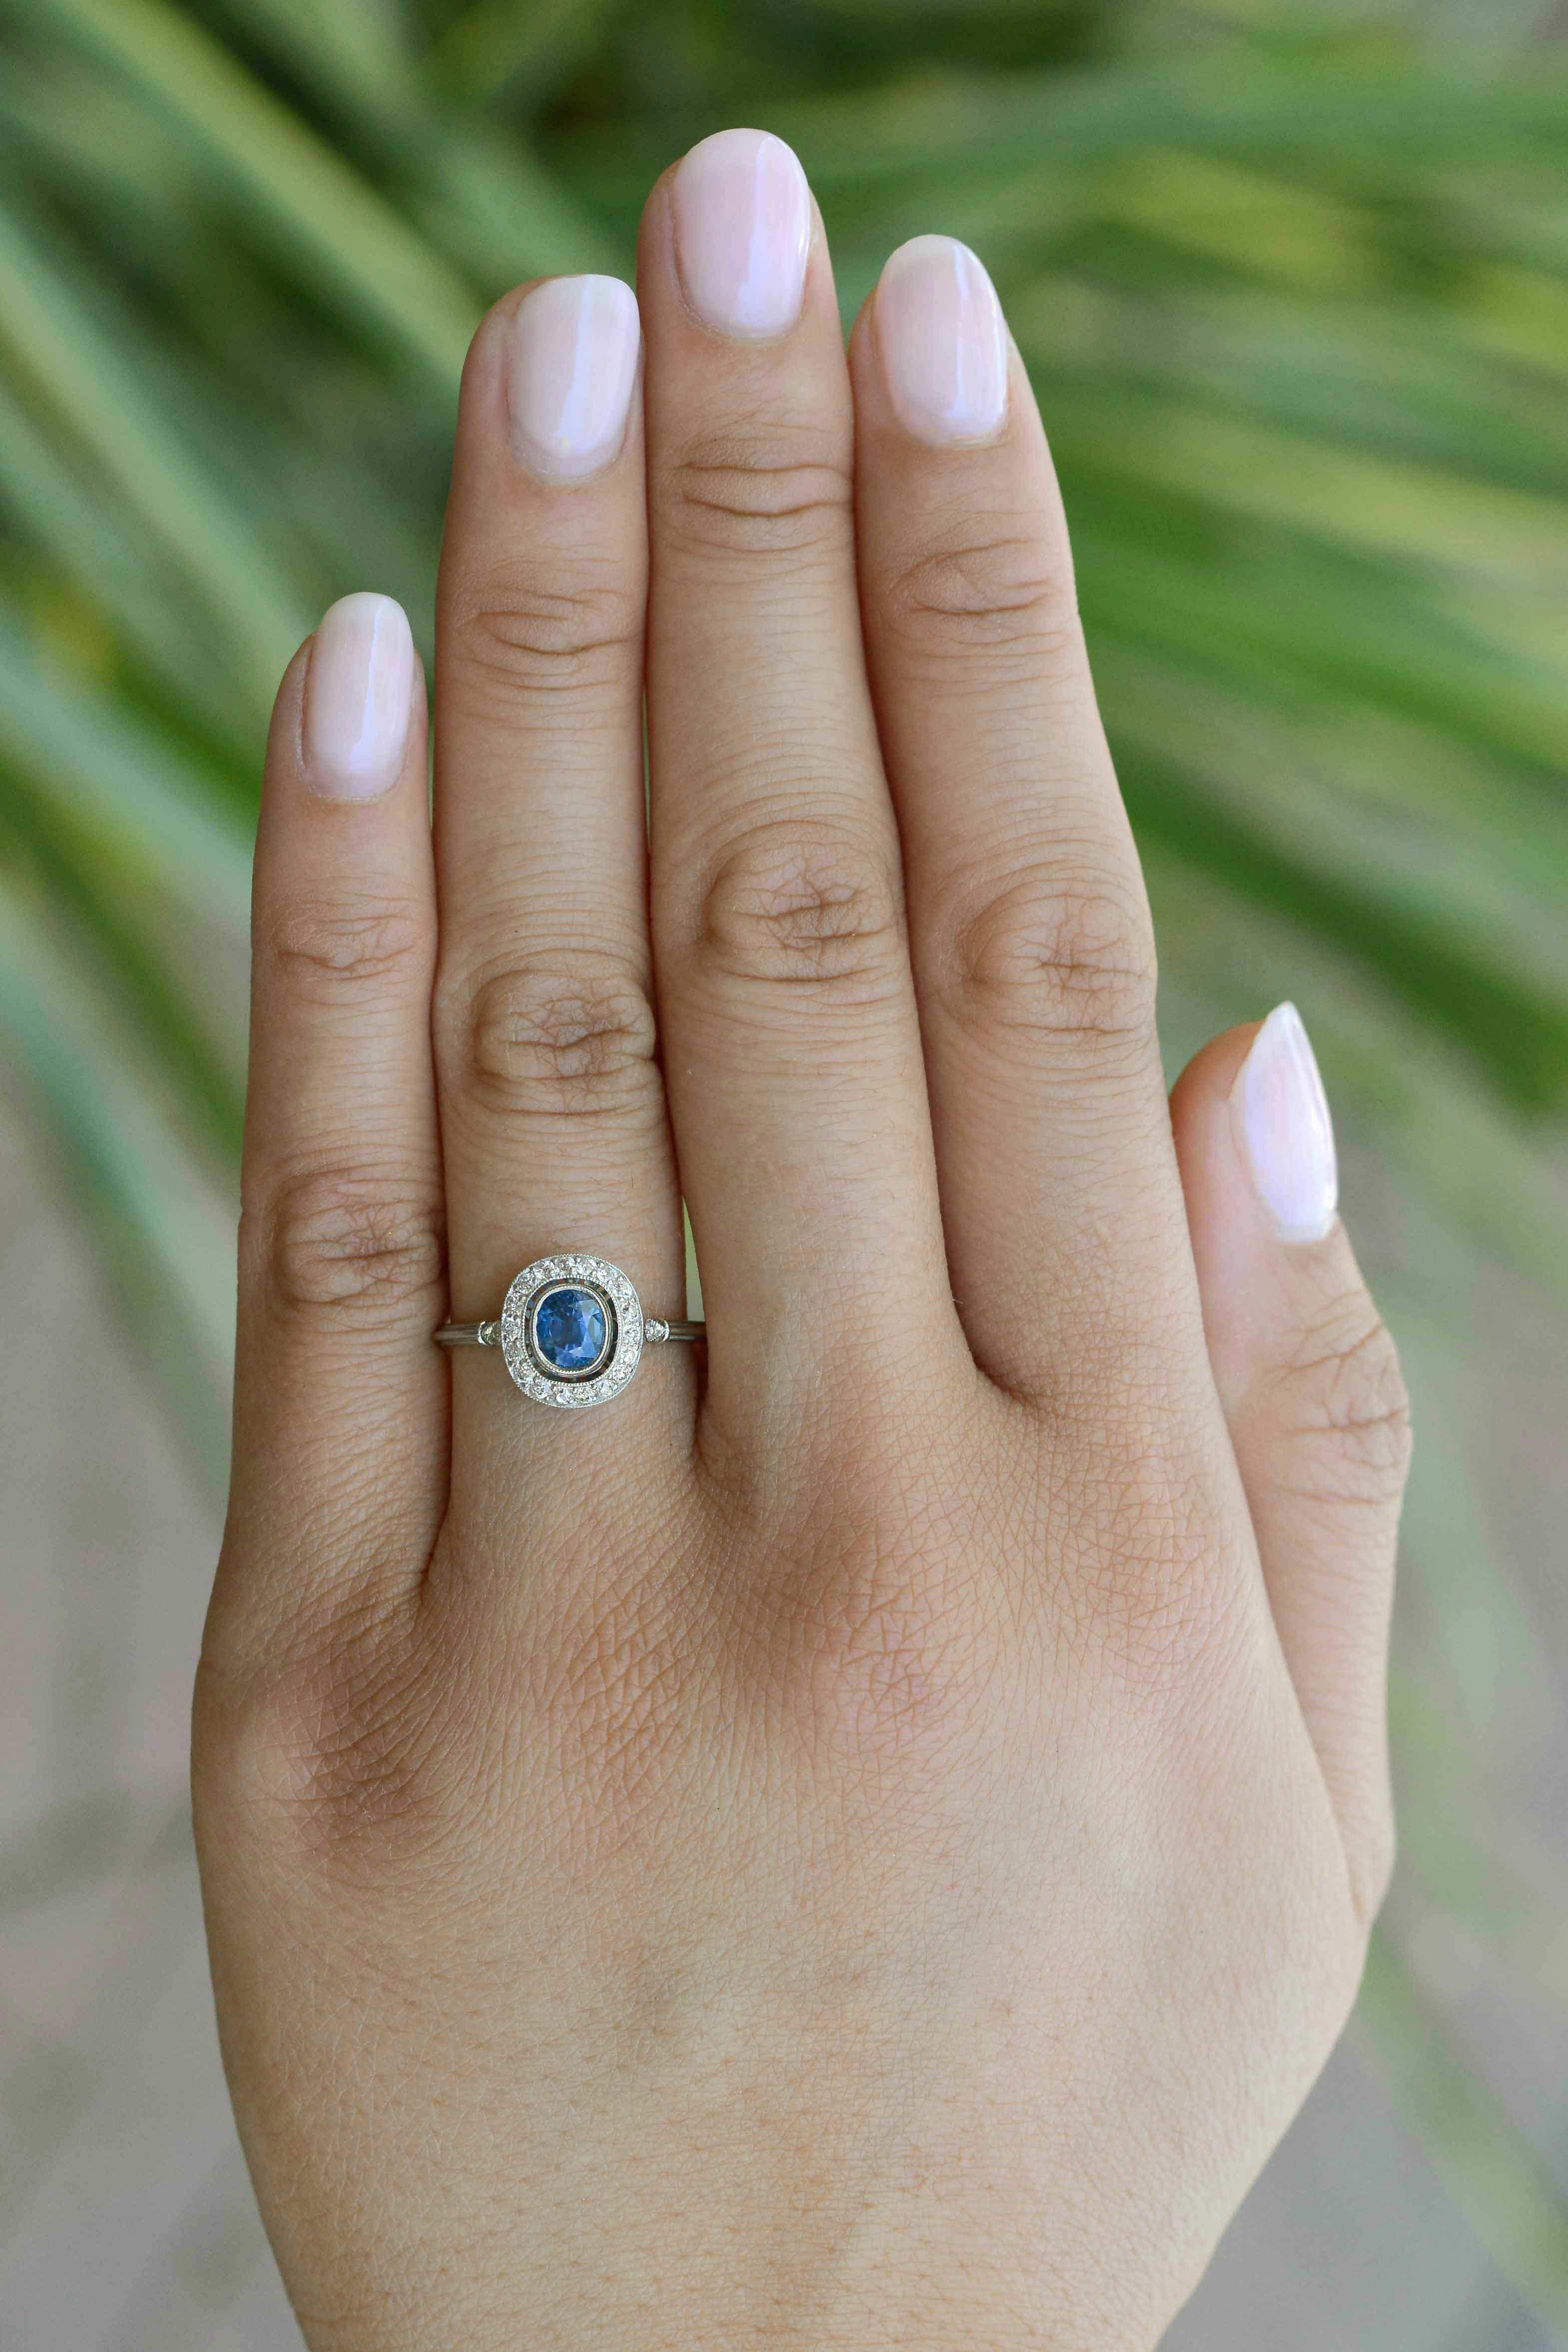 Sitting regally in a millegrain bezel, the velvety, navy blue sapphire commands attention with a twinkling surround of diamonds in a low setting of pure platinum in this quintessential Art Deco revival gemstone engagement ring. Sapphire symbolizes